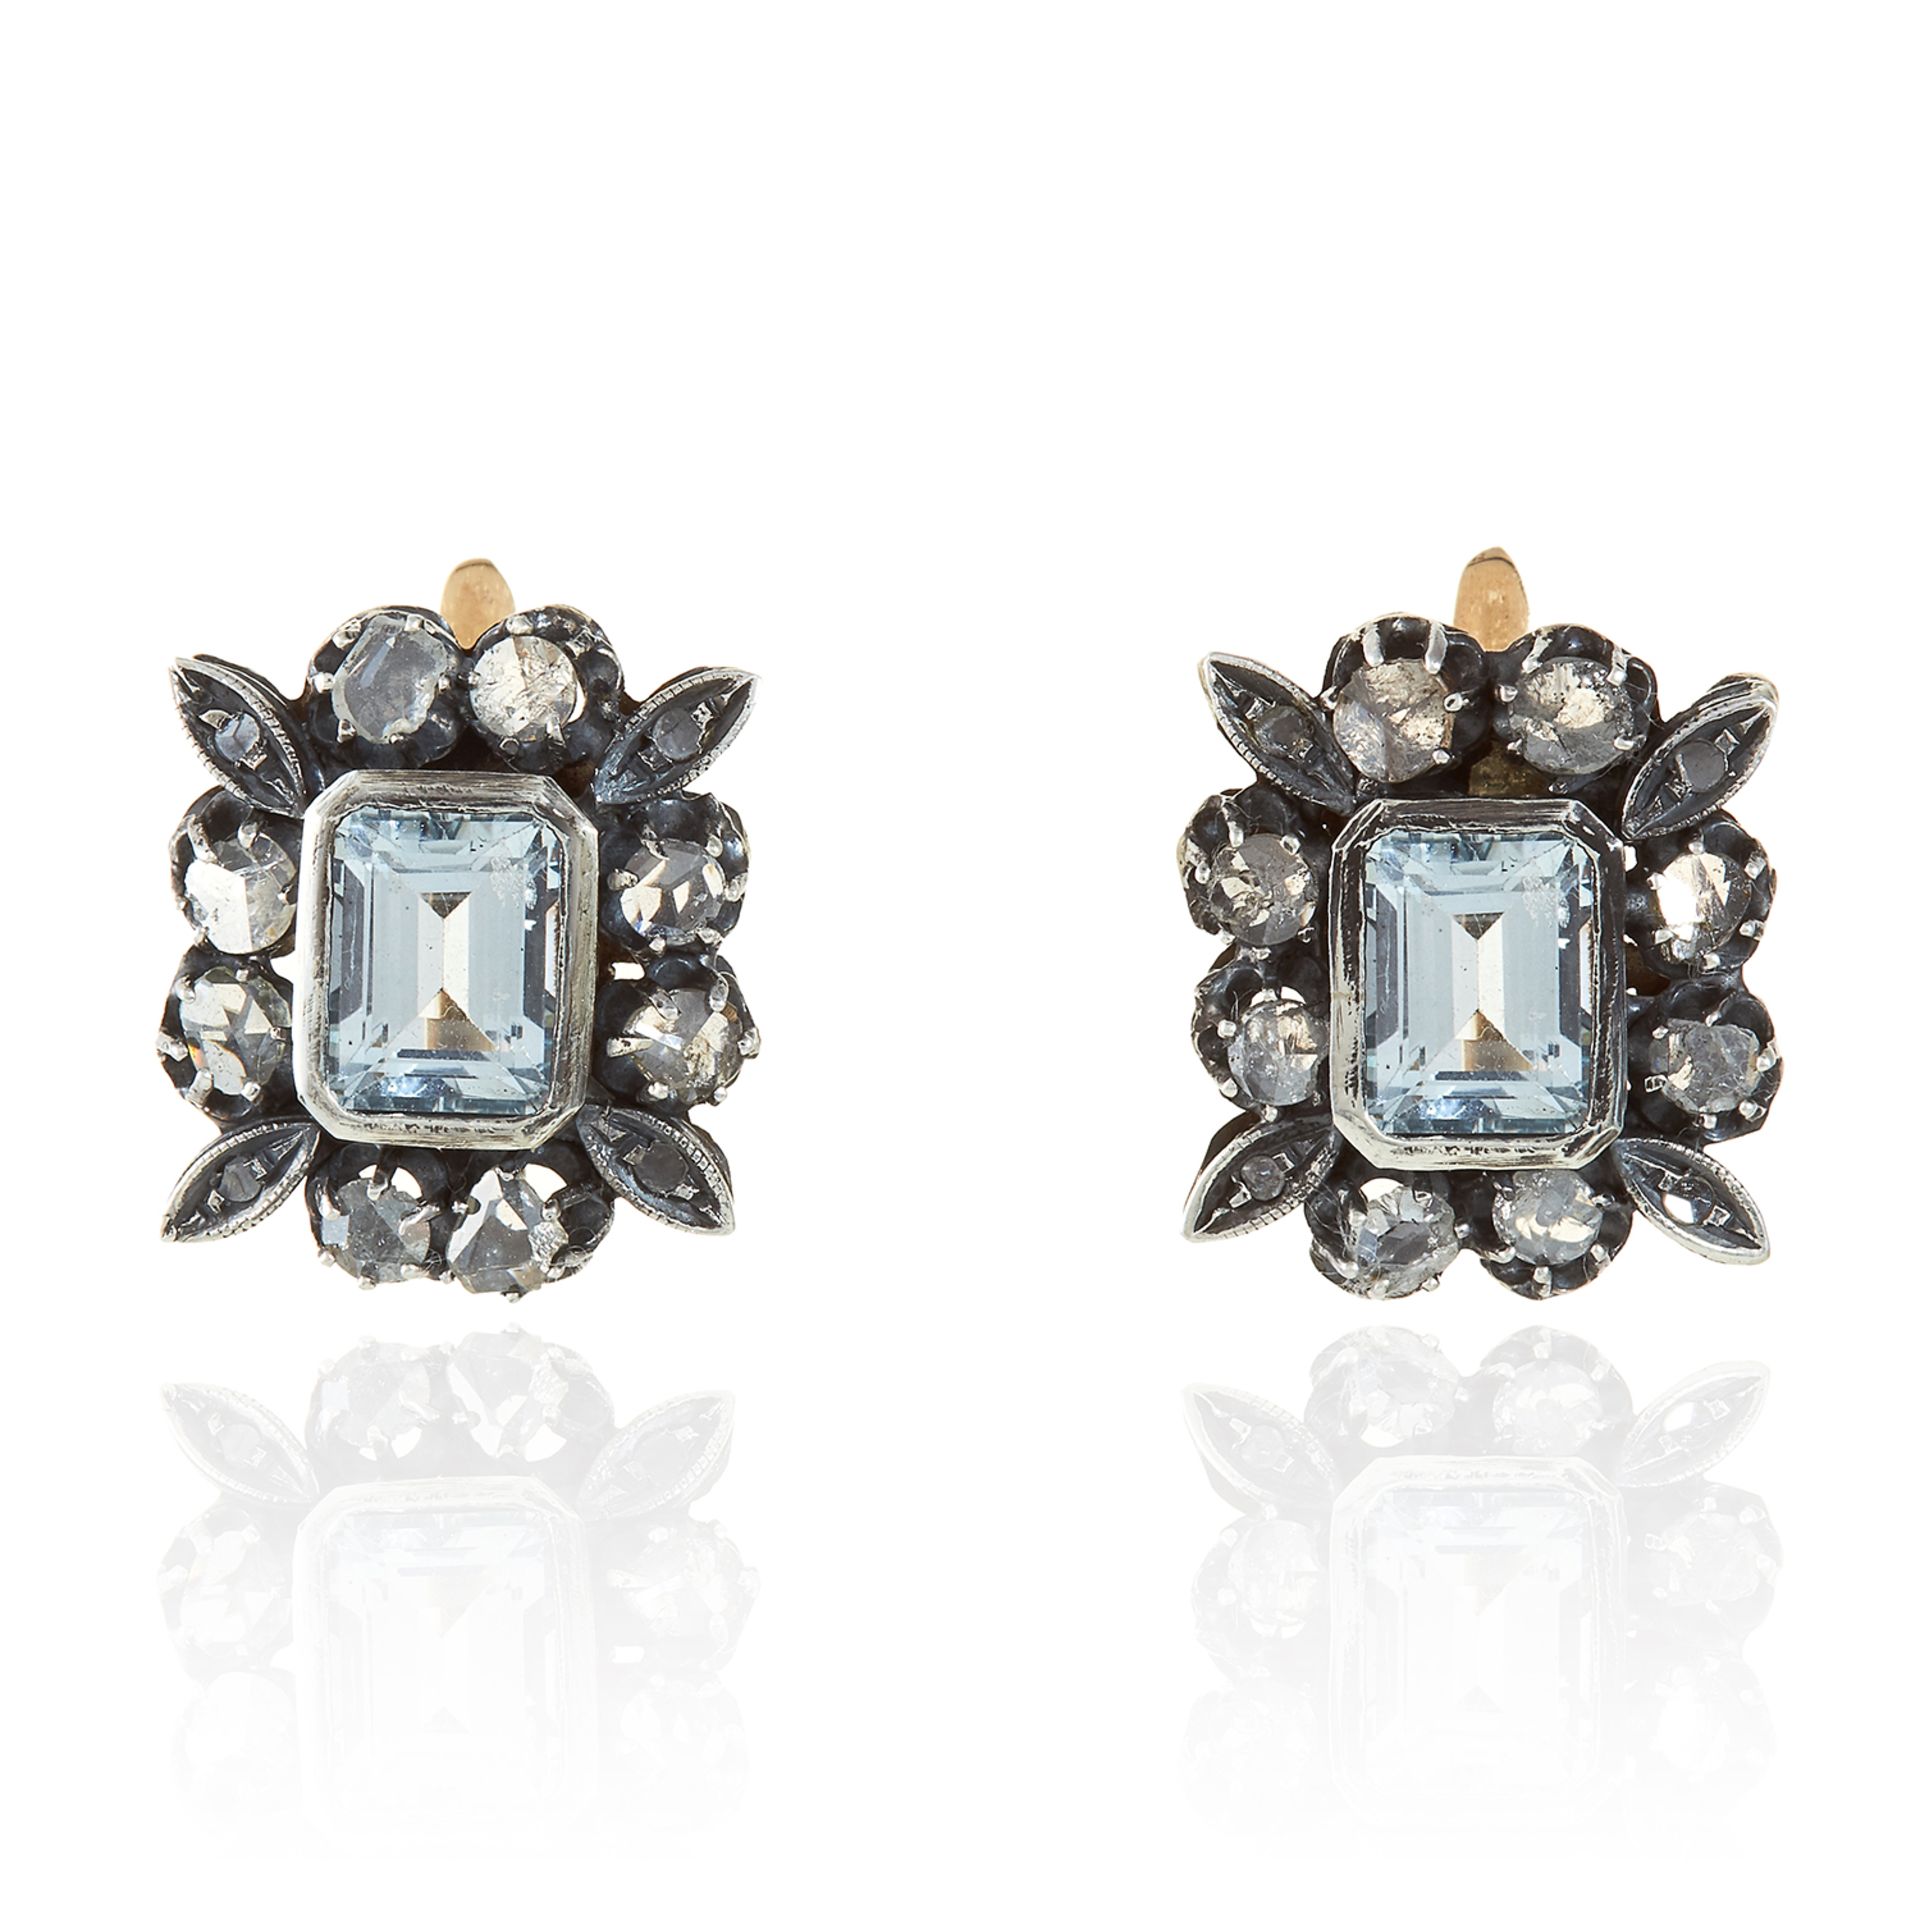 A PAIR OF AQUAMARINE AND DIAMOND EARRINGS in yellow gold and silver, the step cut aquamarines within